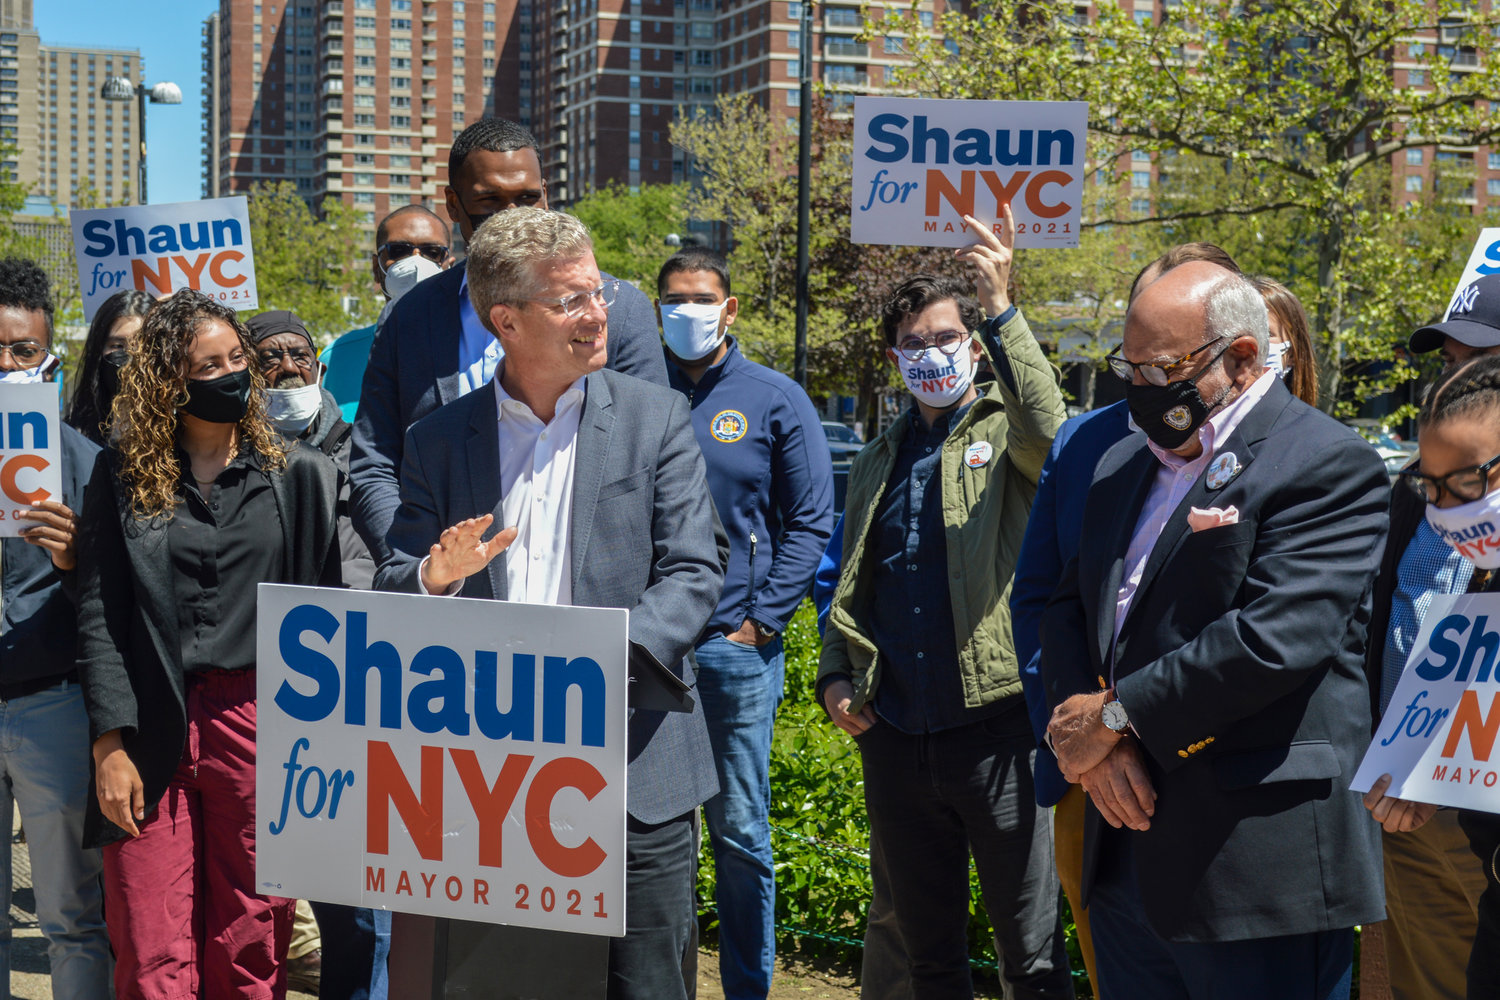 Former U.S. Department of Housing and Urban Development secretary Shaun Donovan says he started his career in housing work in this corner of the Bronx. He’s one of eight candidates running for mayor in the June 22 Democratic primary.